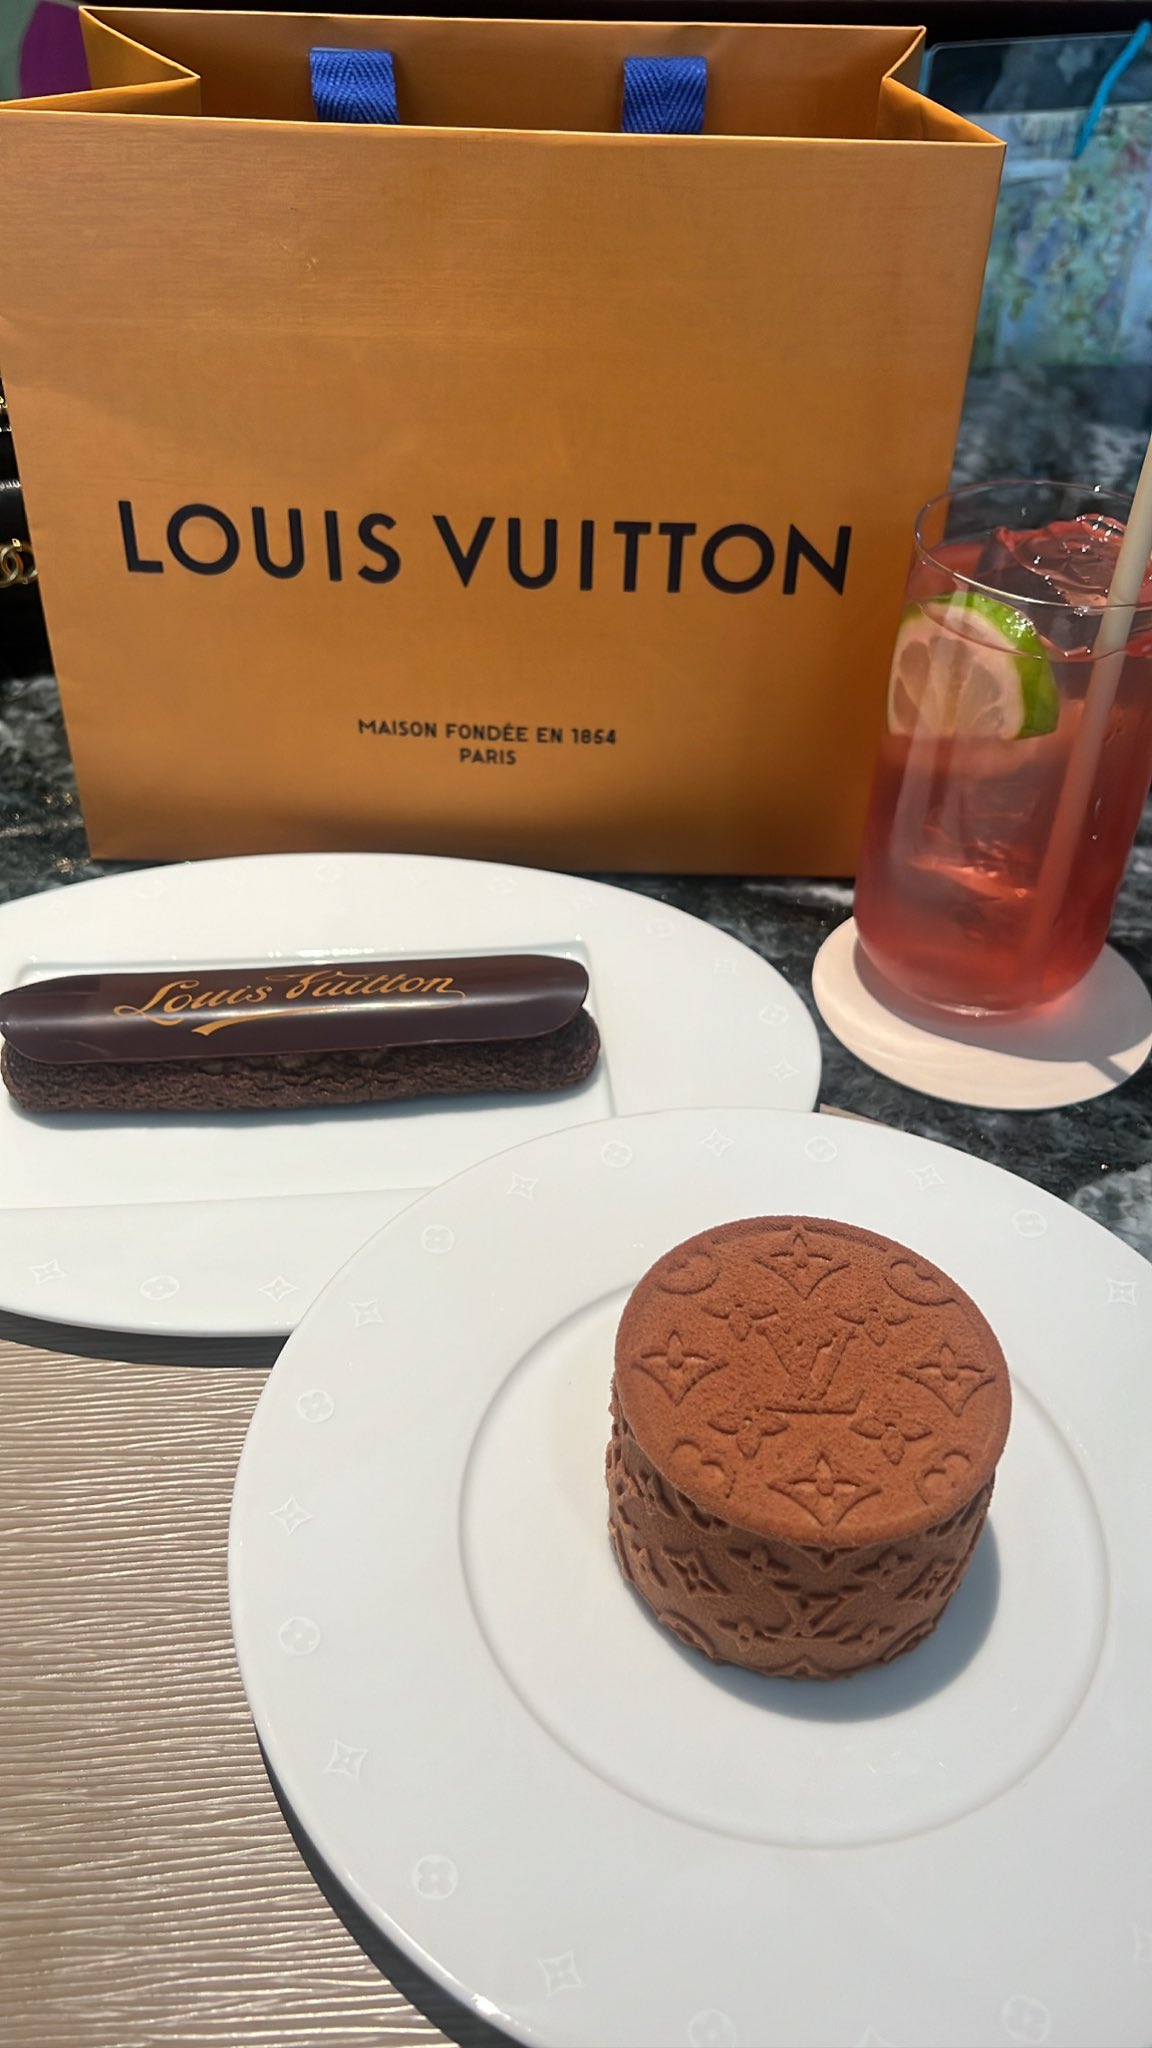 AMG Brie. 💎✨ on X: Today's exploration in Paris: Louis Vuitton